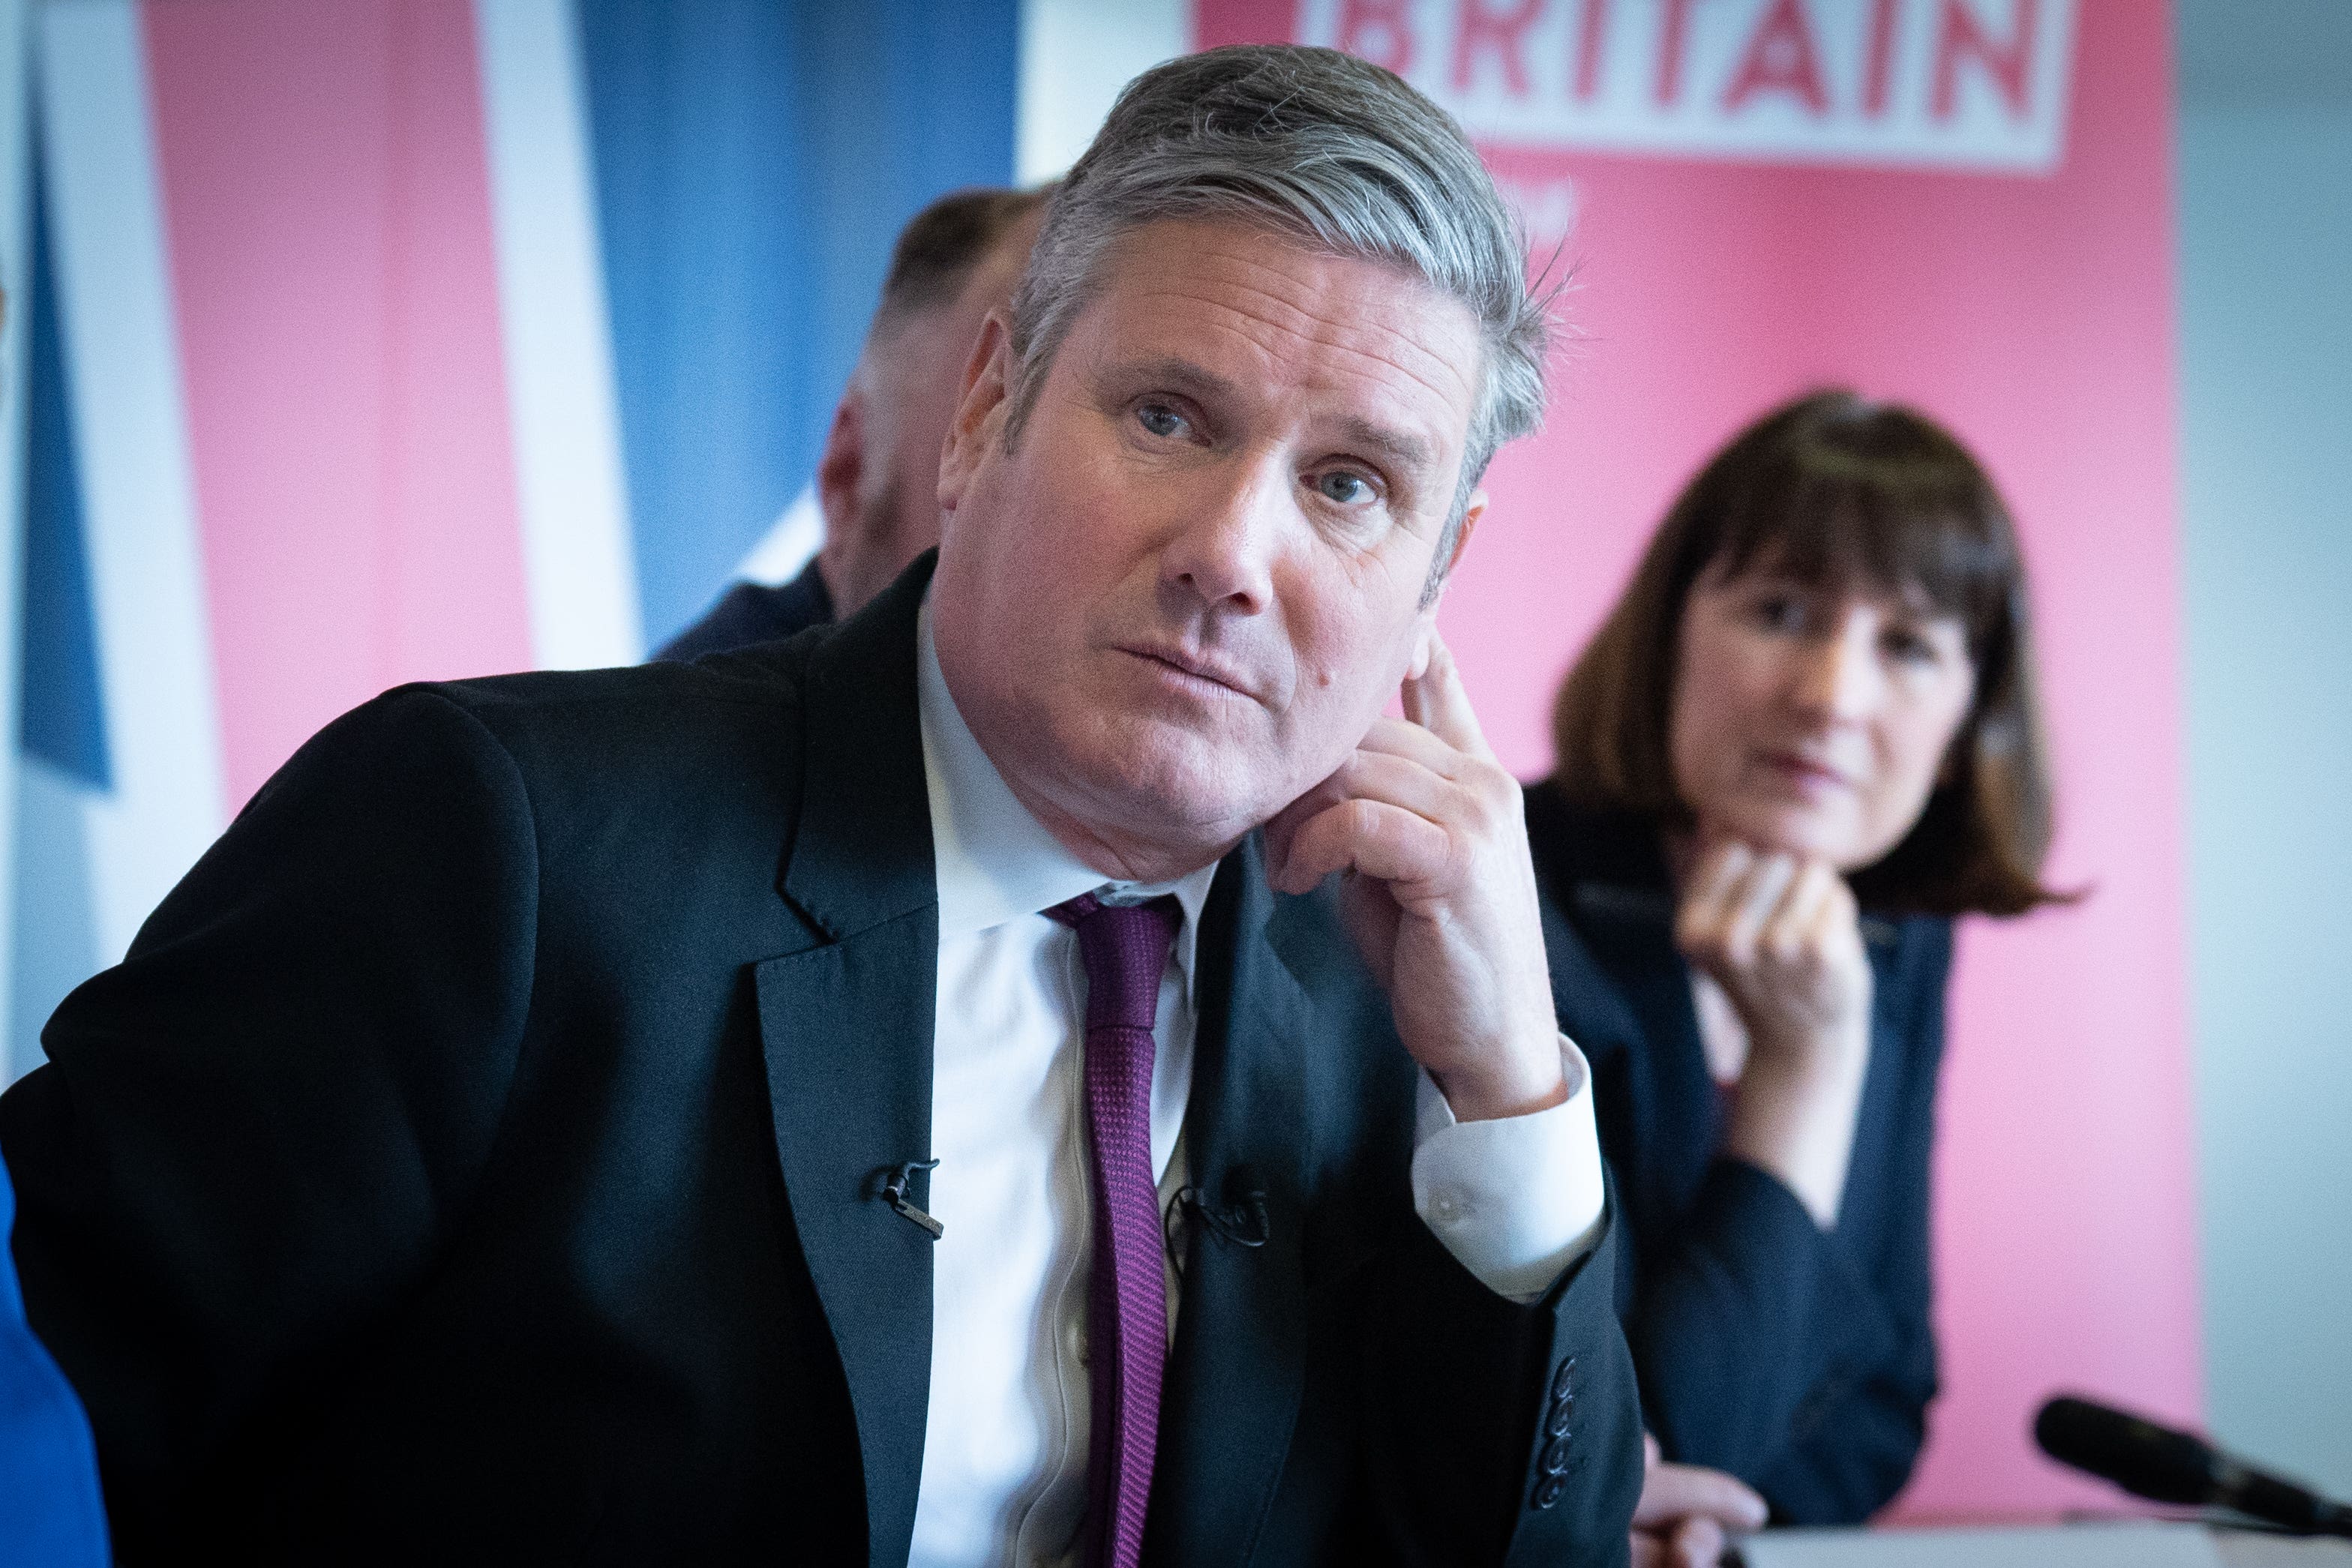 Keir Starmer says he has to be ‘ruthless’